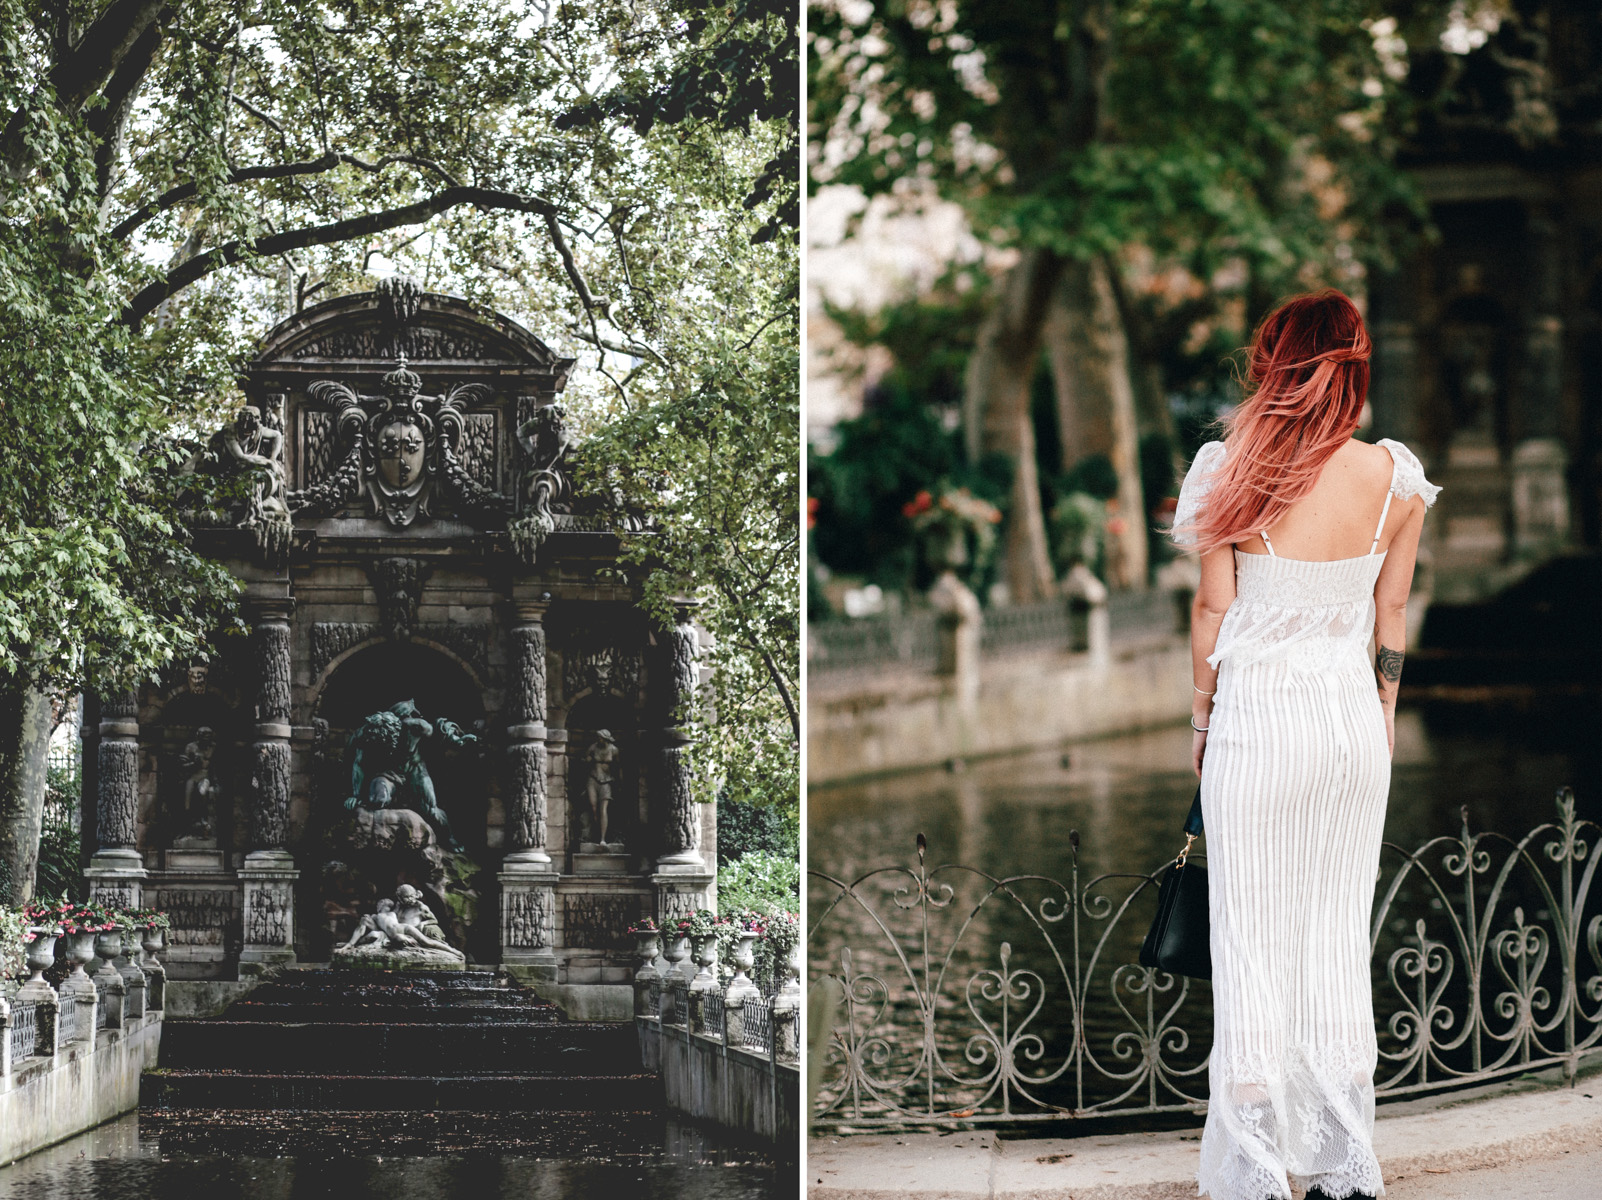 Luxembourg Gardens outfit inspiration